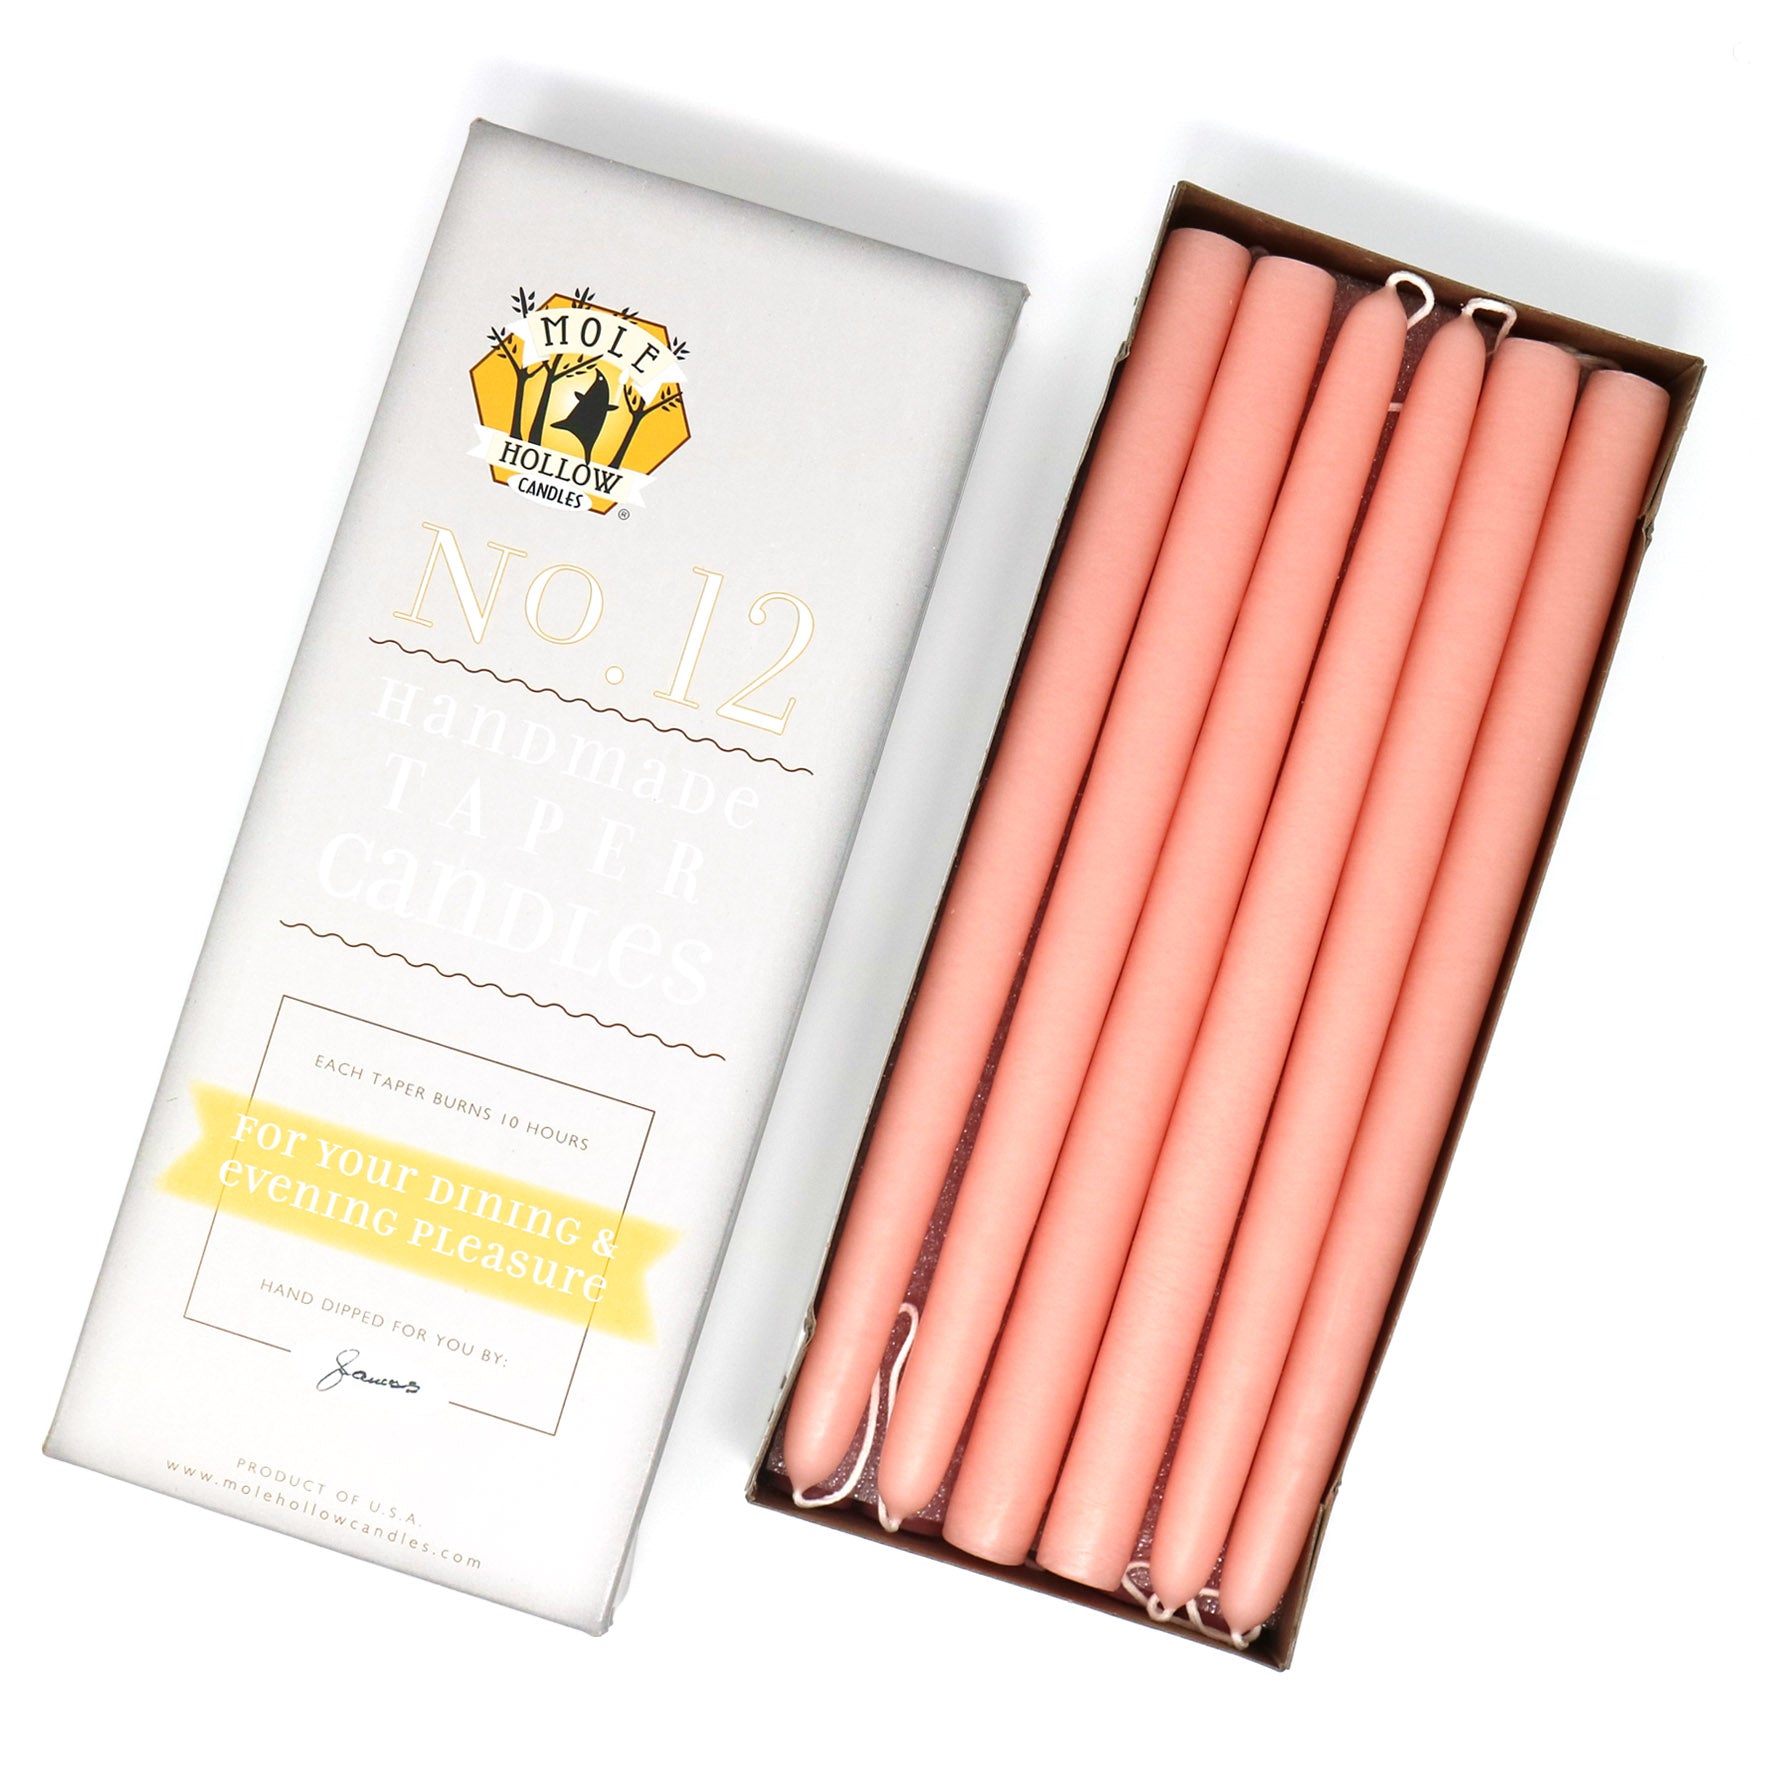 12" Dripless Taper Candles - Creamy Peach Unscented - Mole Hollow Candles